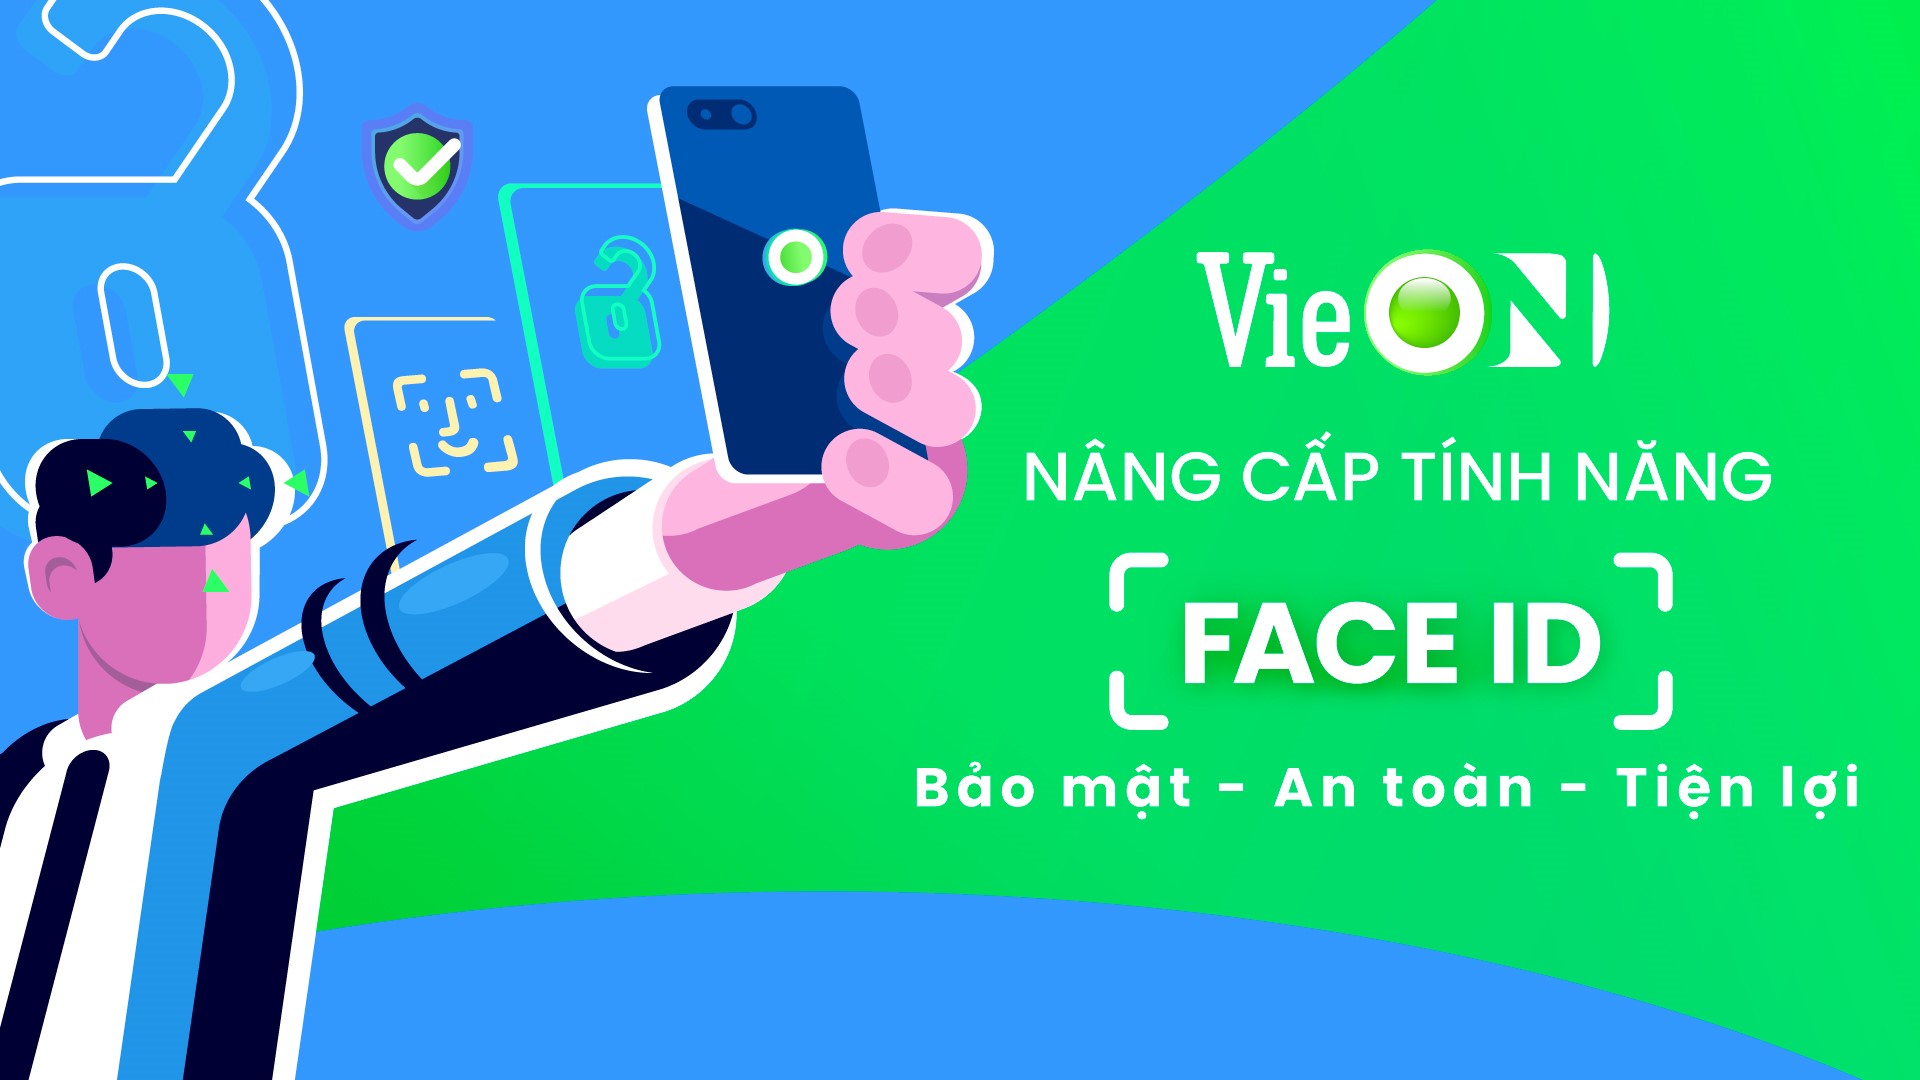 The FaceID feature of VieON